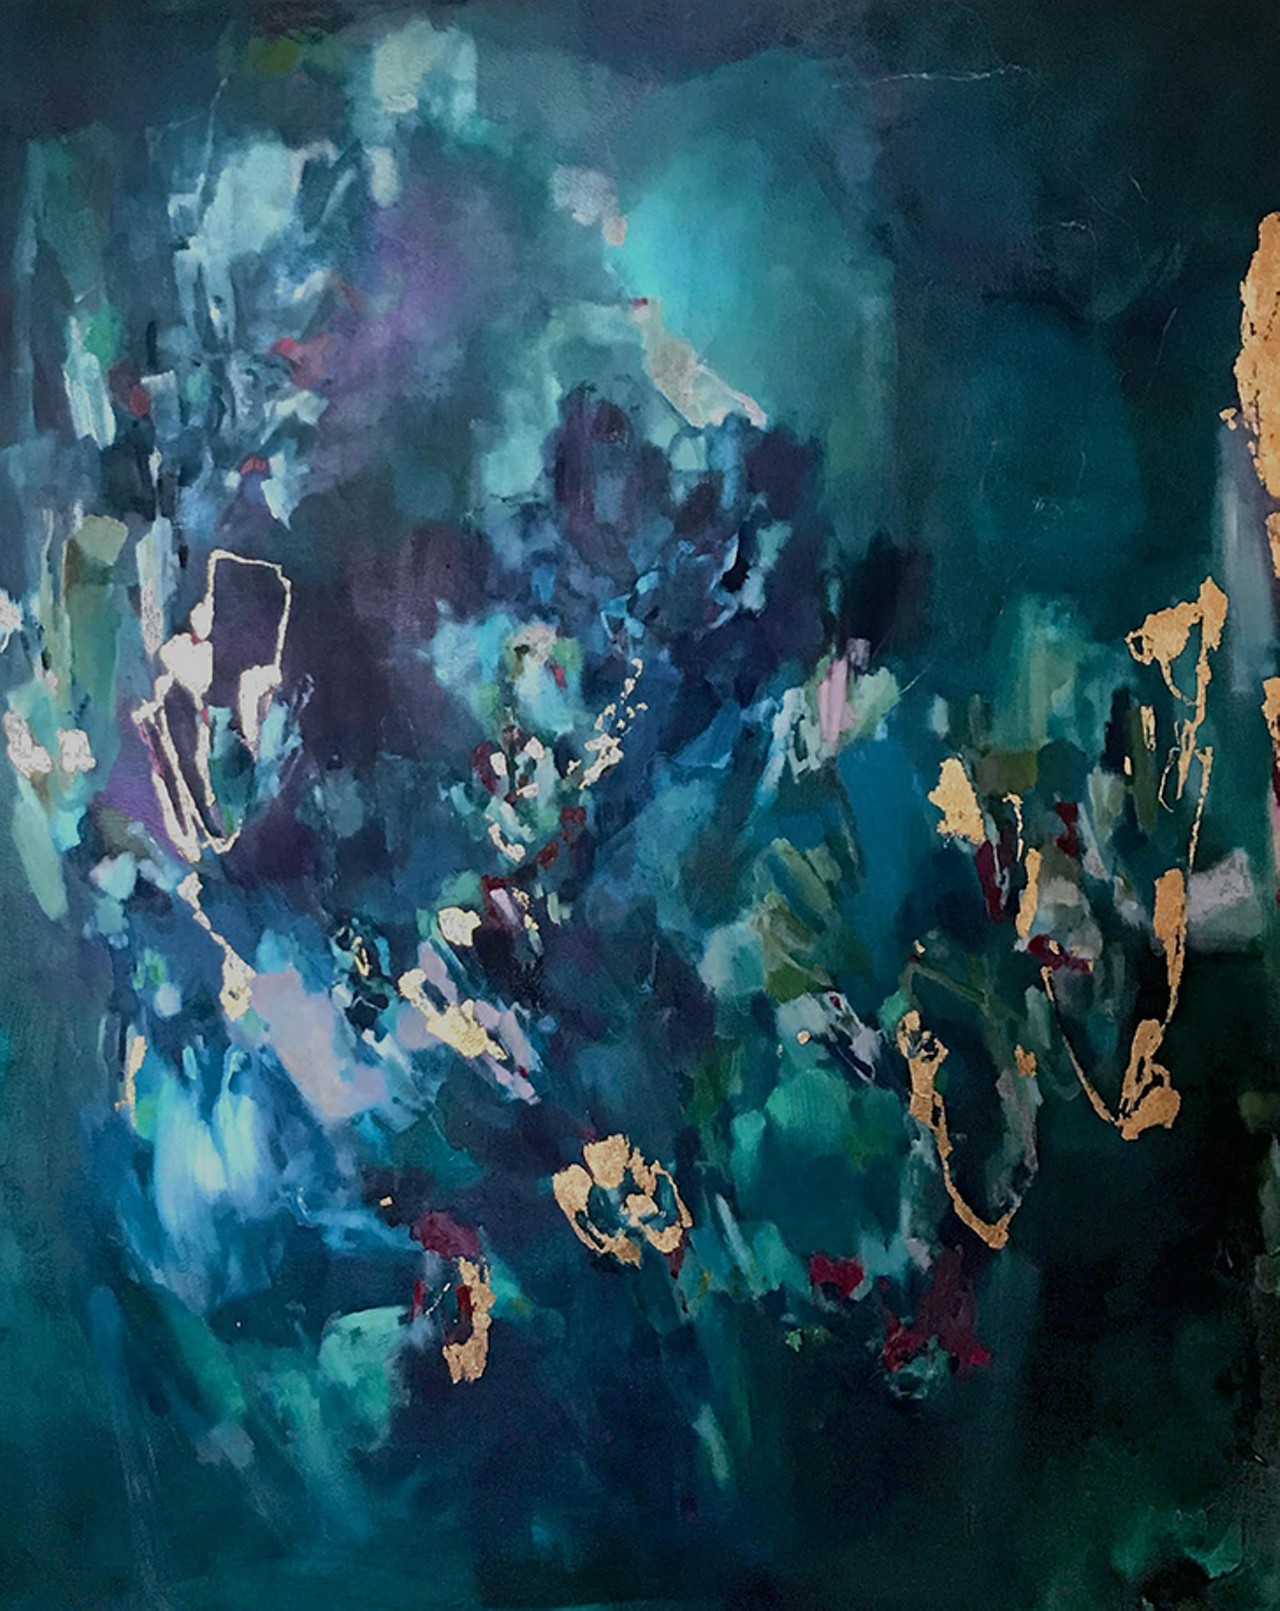 Wandering by Stephanie Ong
&#147;Abstract expressionism, for me, means showing up.  Making deliberate marks, interacting with the painting, putting it all out there.  It's telling a story I may not fully understand myself until it&#146;s complete.&#148; &#151;Stephanie Ong
Image courtesy of Stephanie Ong.